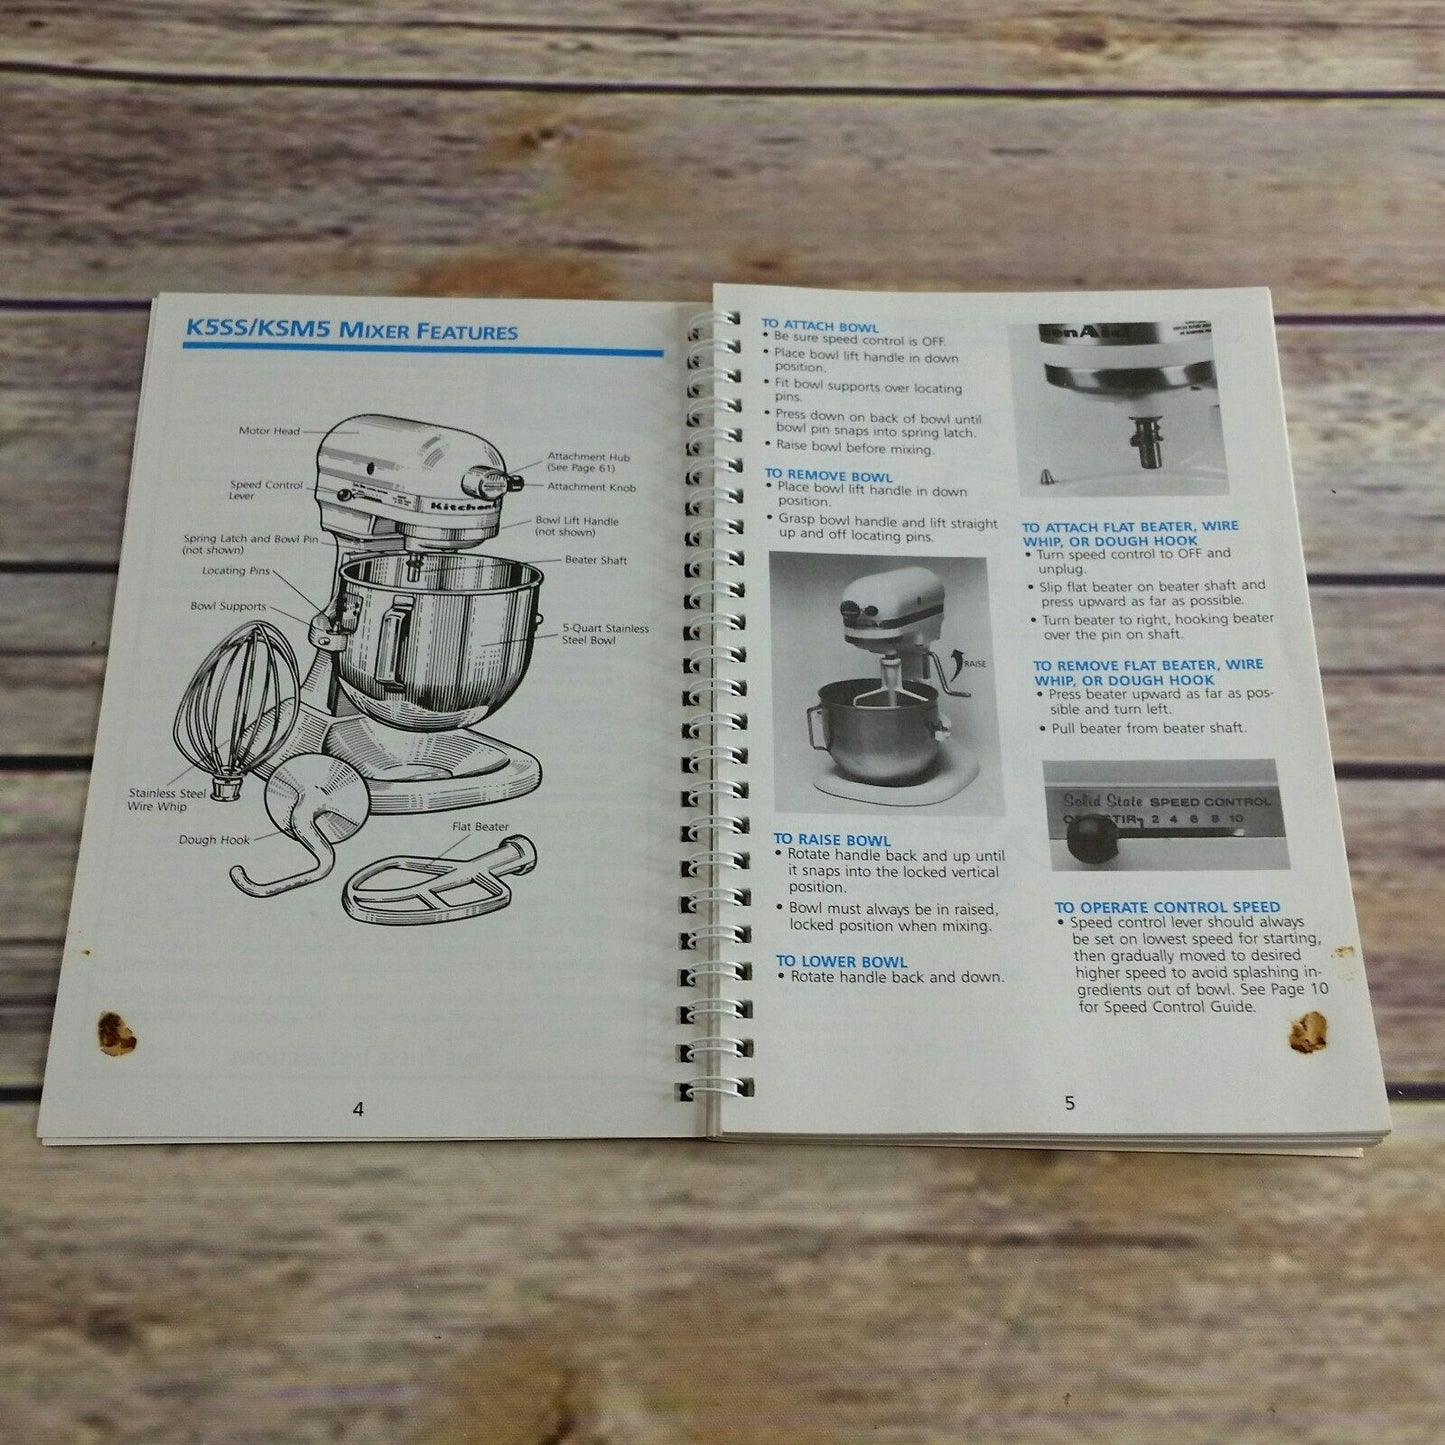 Vtg Kitchen Aid Mixers and Attachments Recipes and Instructions K45SS KSM90 K5SS KSM5 Manual Book Cookbook